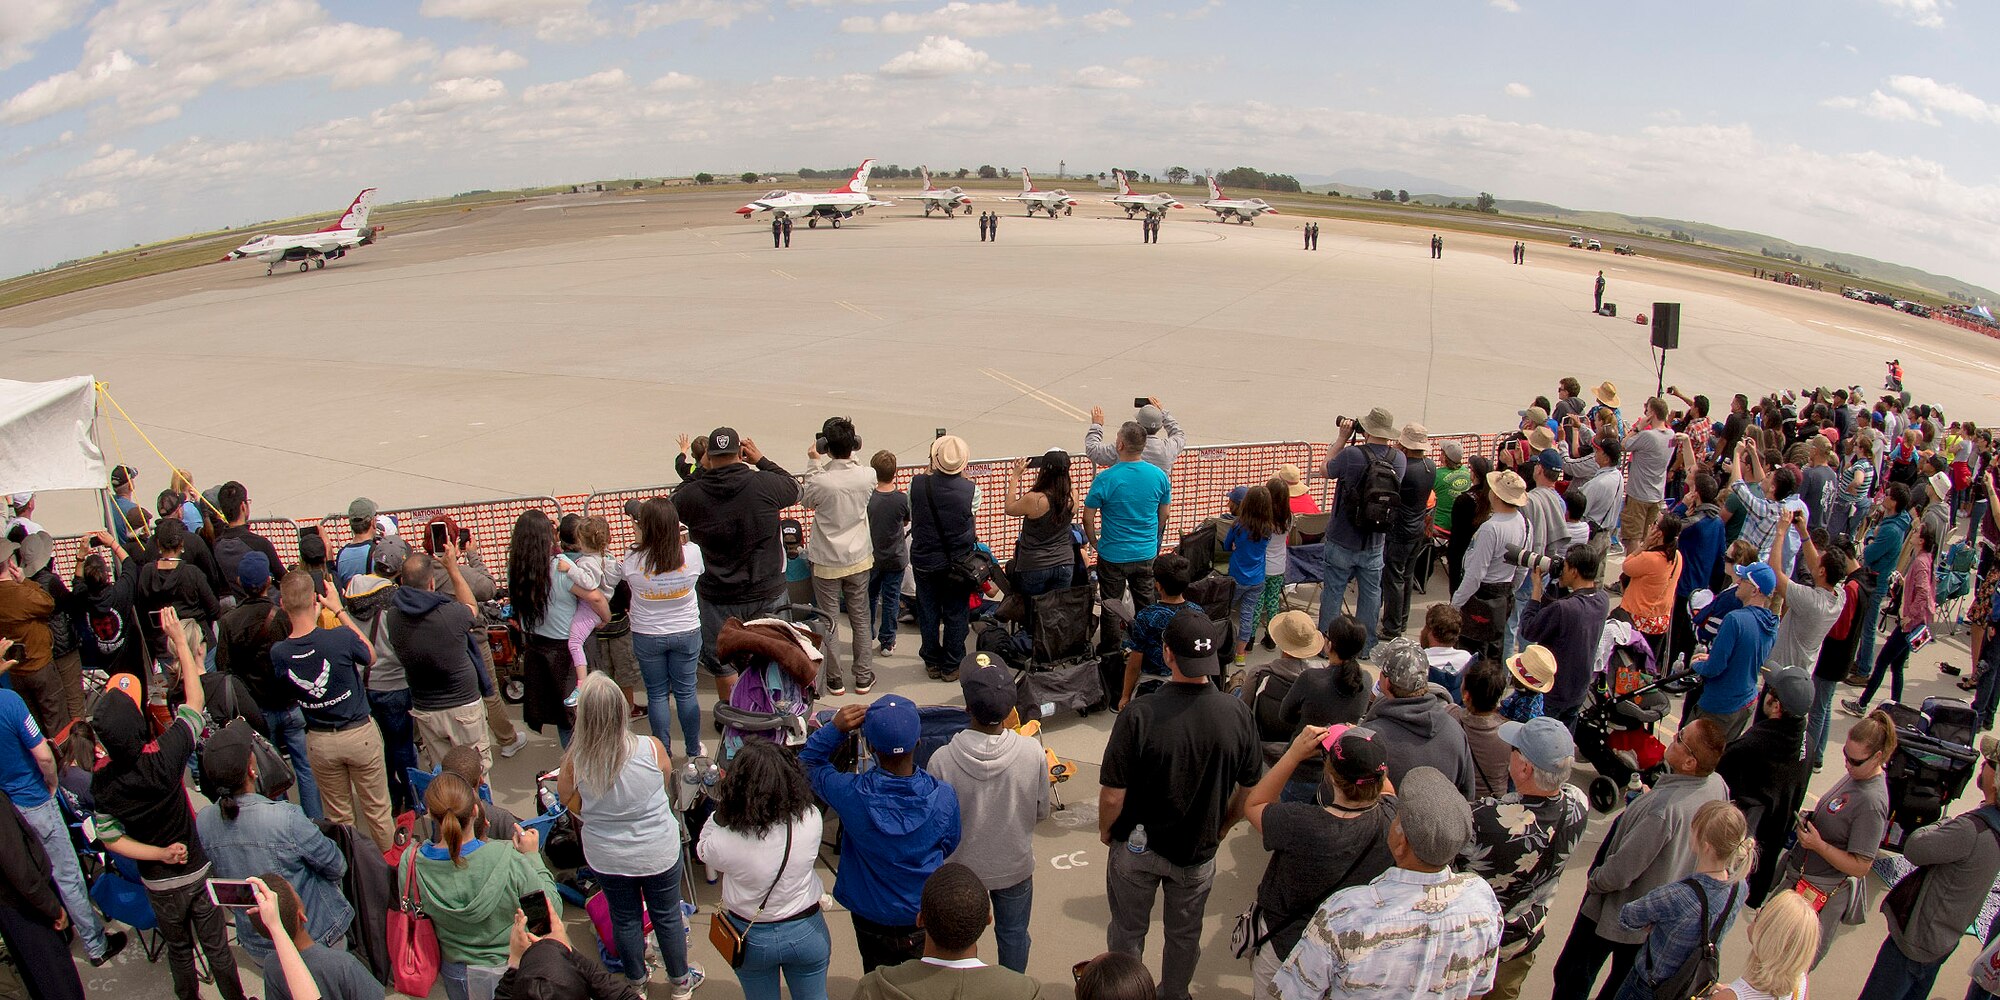 Thousands of people attended the Wings Over Solano Air Show at Travis Air Force Base Calif., May 6, 2017. Performers included the U.S. Air Force Thunderbirds Aerial Demonstration Team, U.S. Air Force Academy Wings of Blue and the U.S. Golden Knights parachute team, as well as civilian performers.    (US Air Force  photo/T.C. Perkins Jr.)